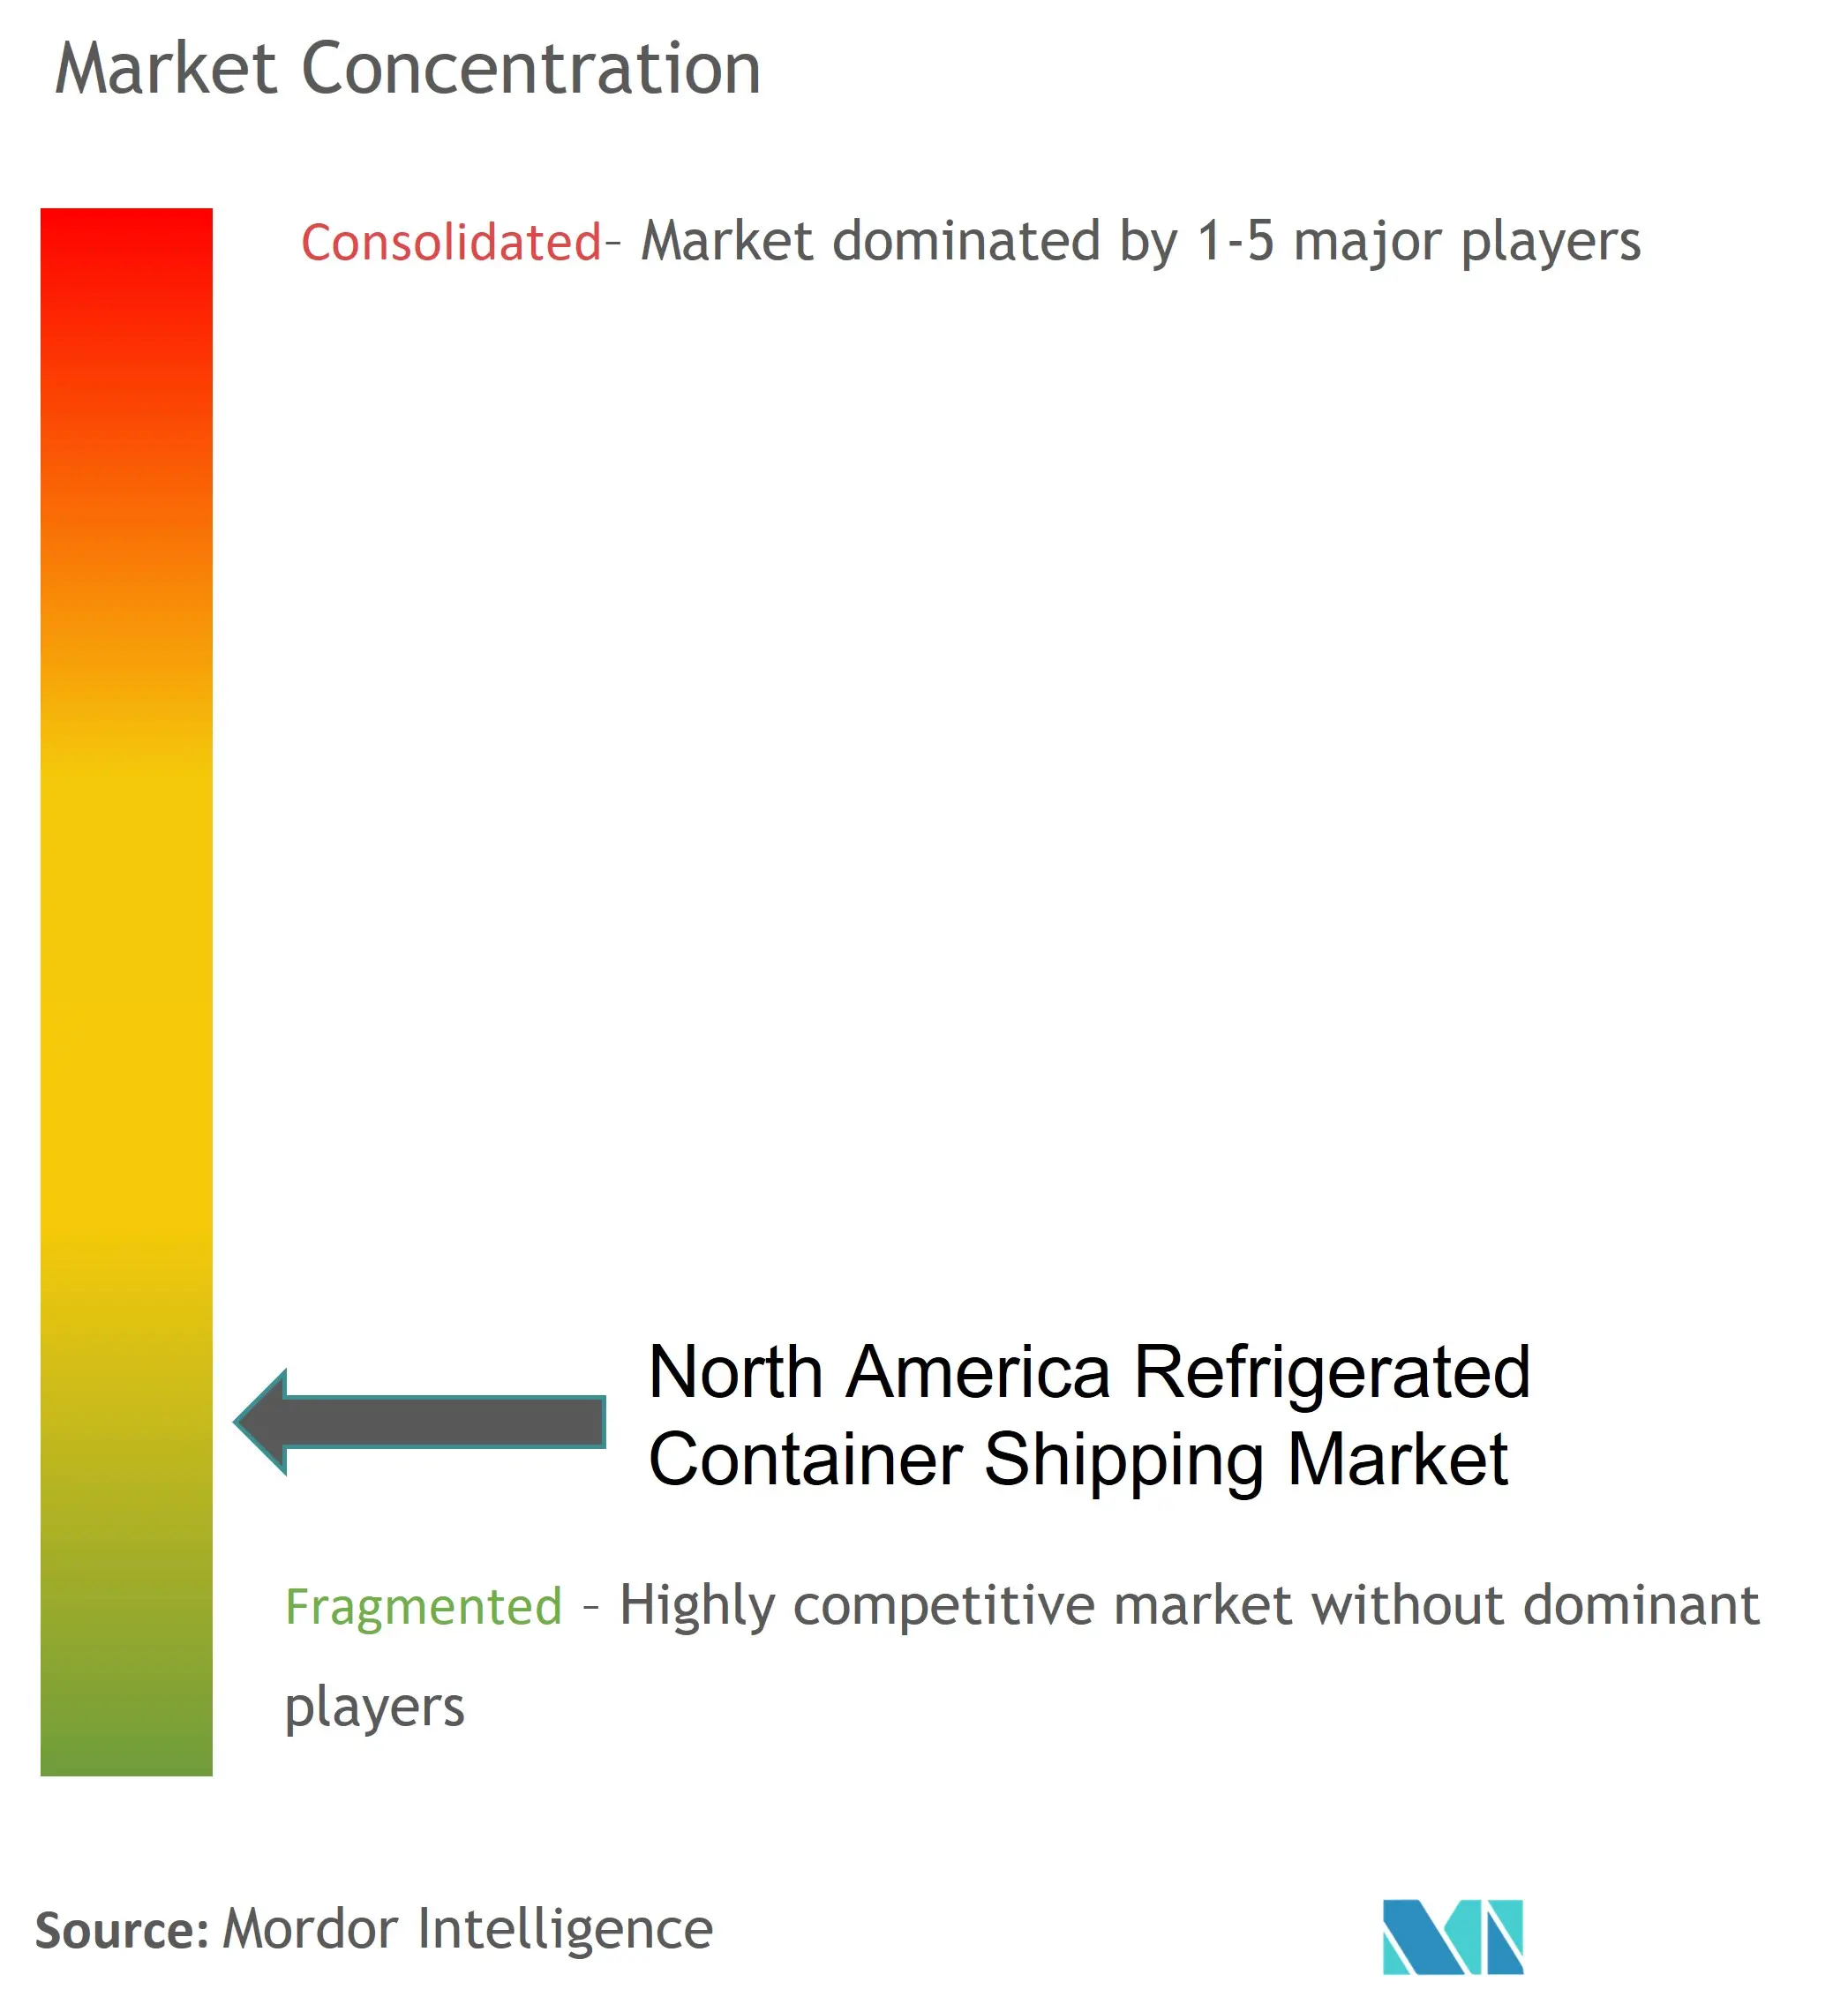 North America Refrigerated Container Shipping Market Concentration